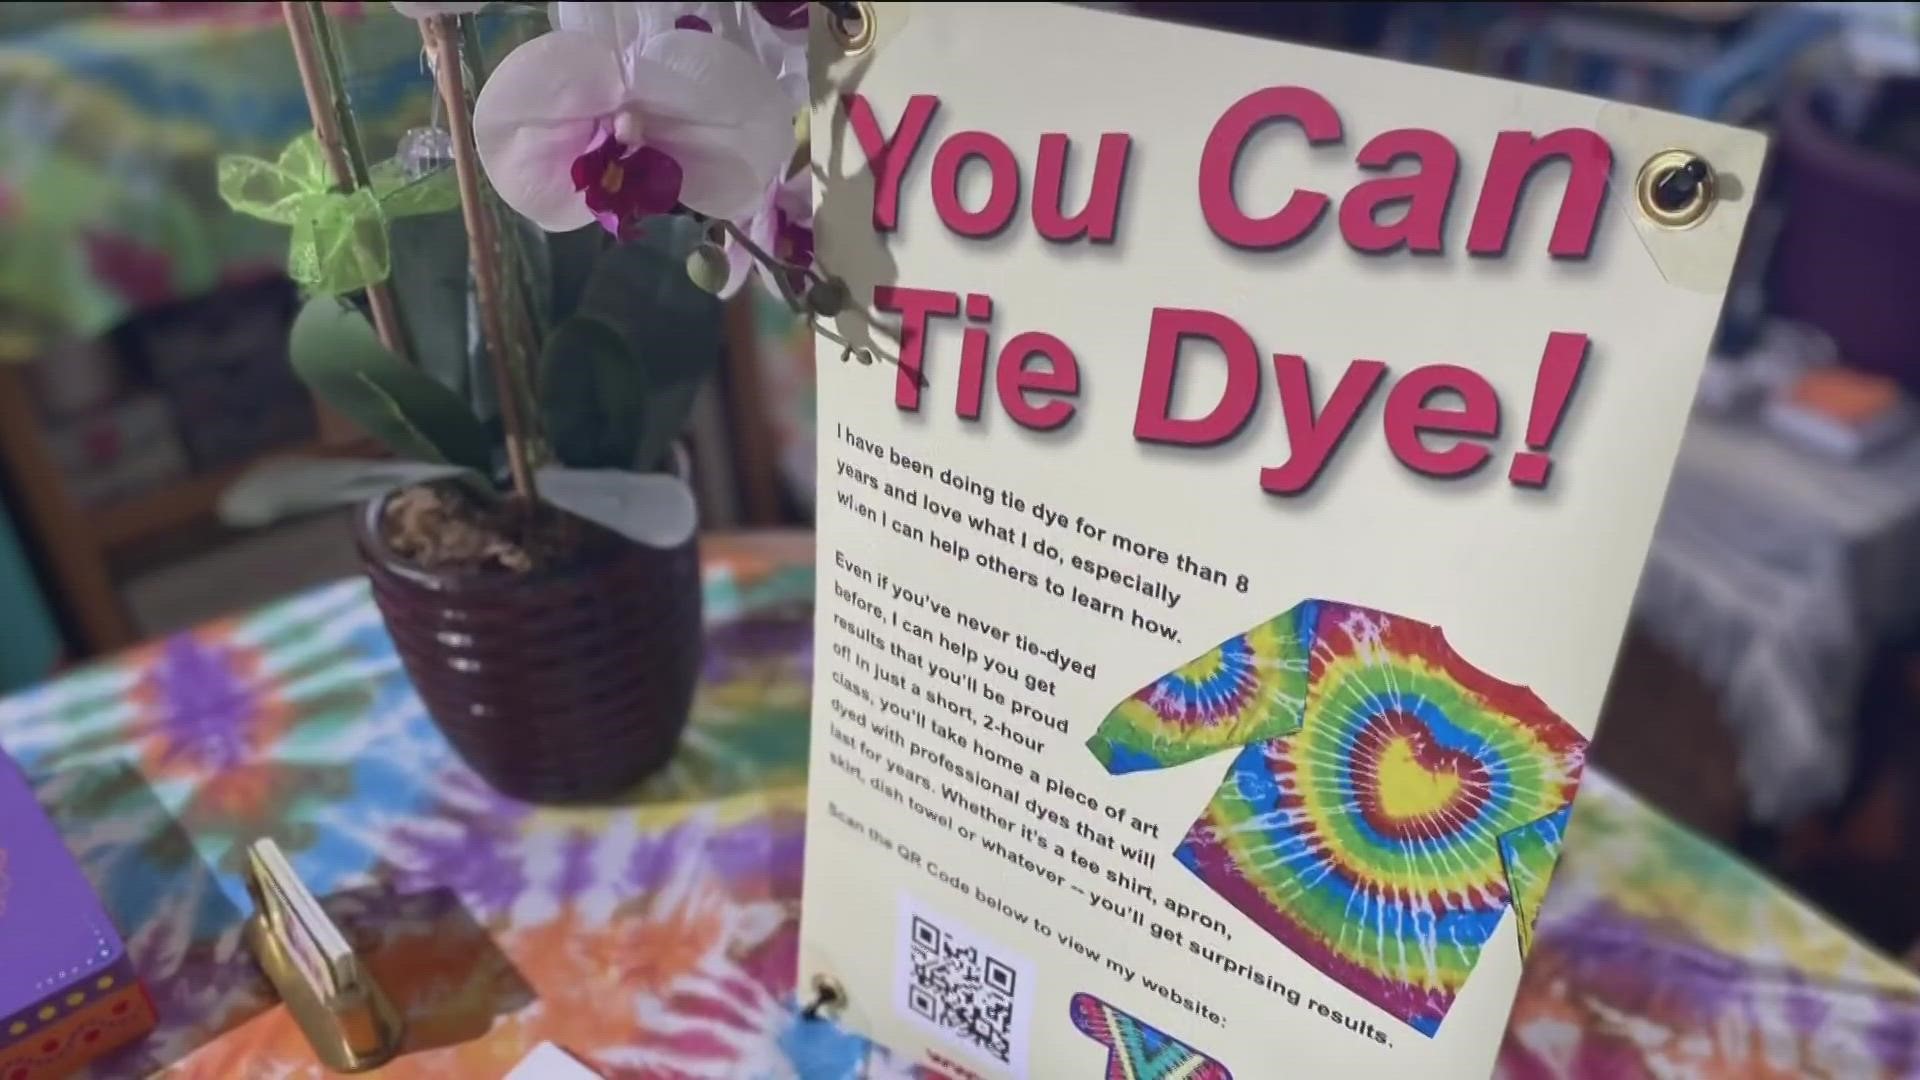 Stacey Smith-Bacon's company 'Fit To Be Tied' teaches the art of tie dye at parties and classes.